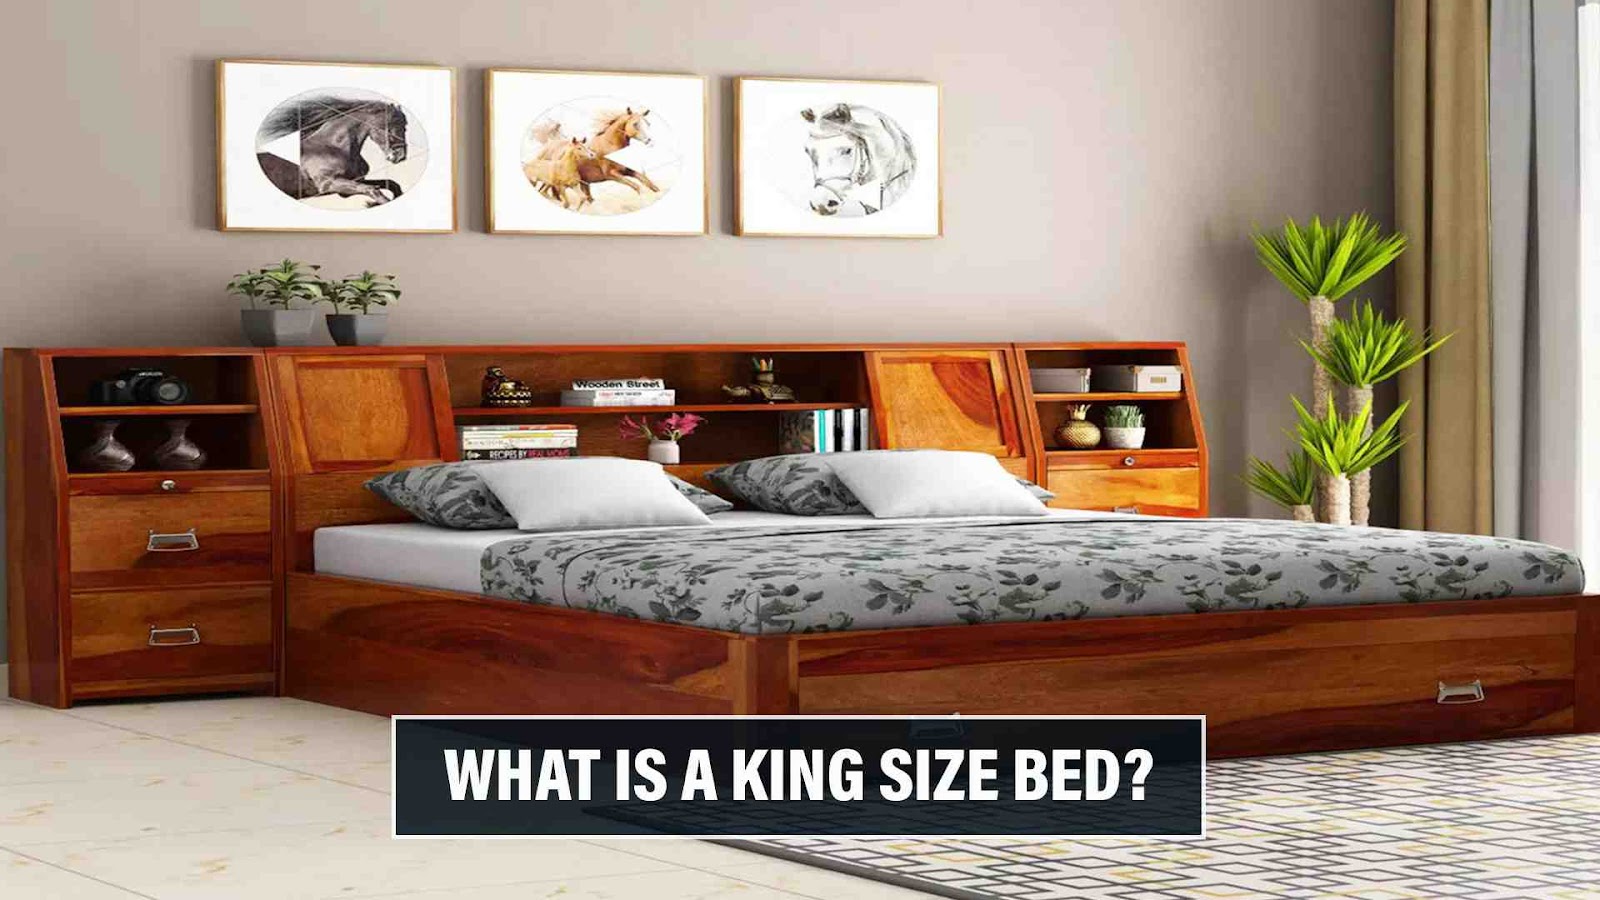 What is a King Size Bed?